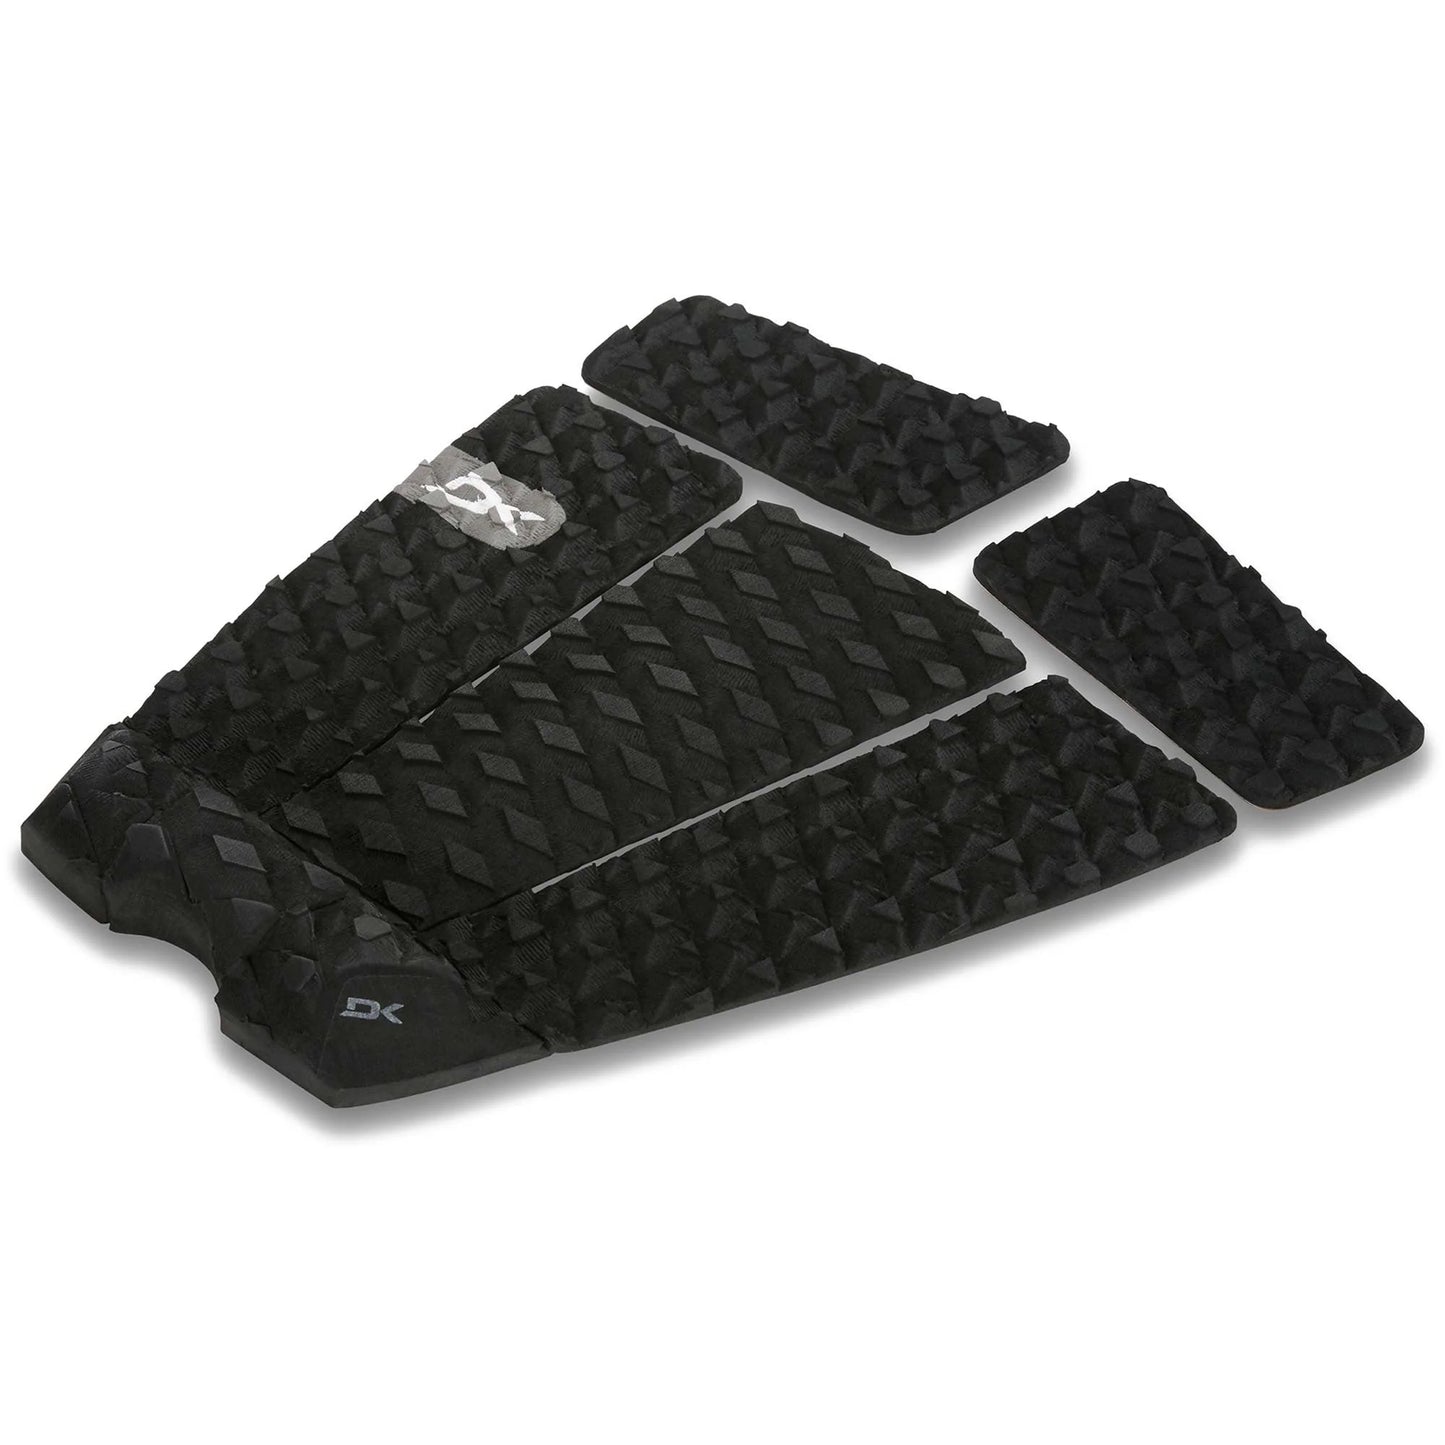 Bruce Irons Pro Surf Traction Pad - Various Colors